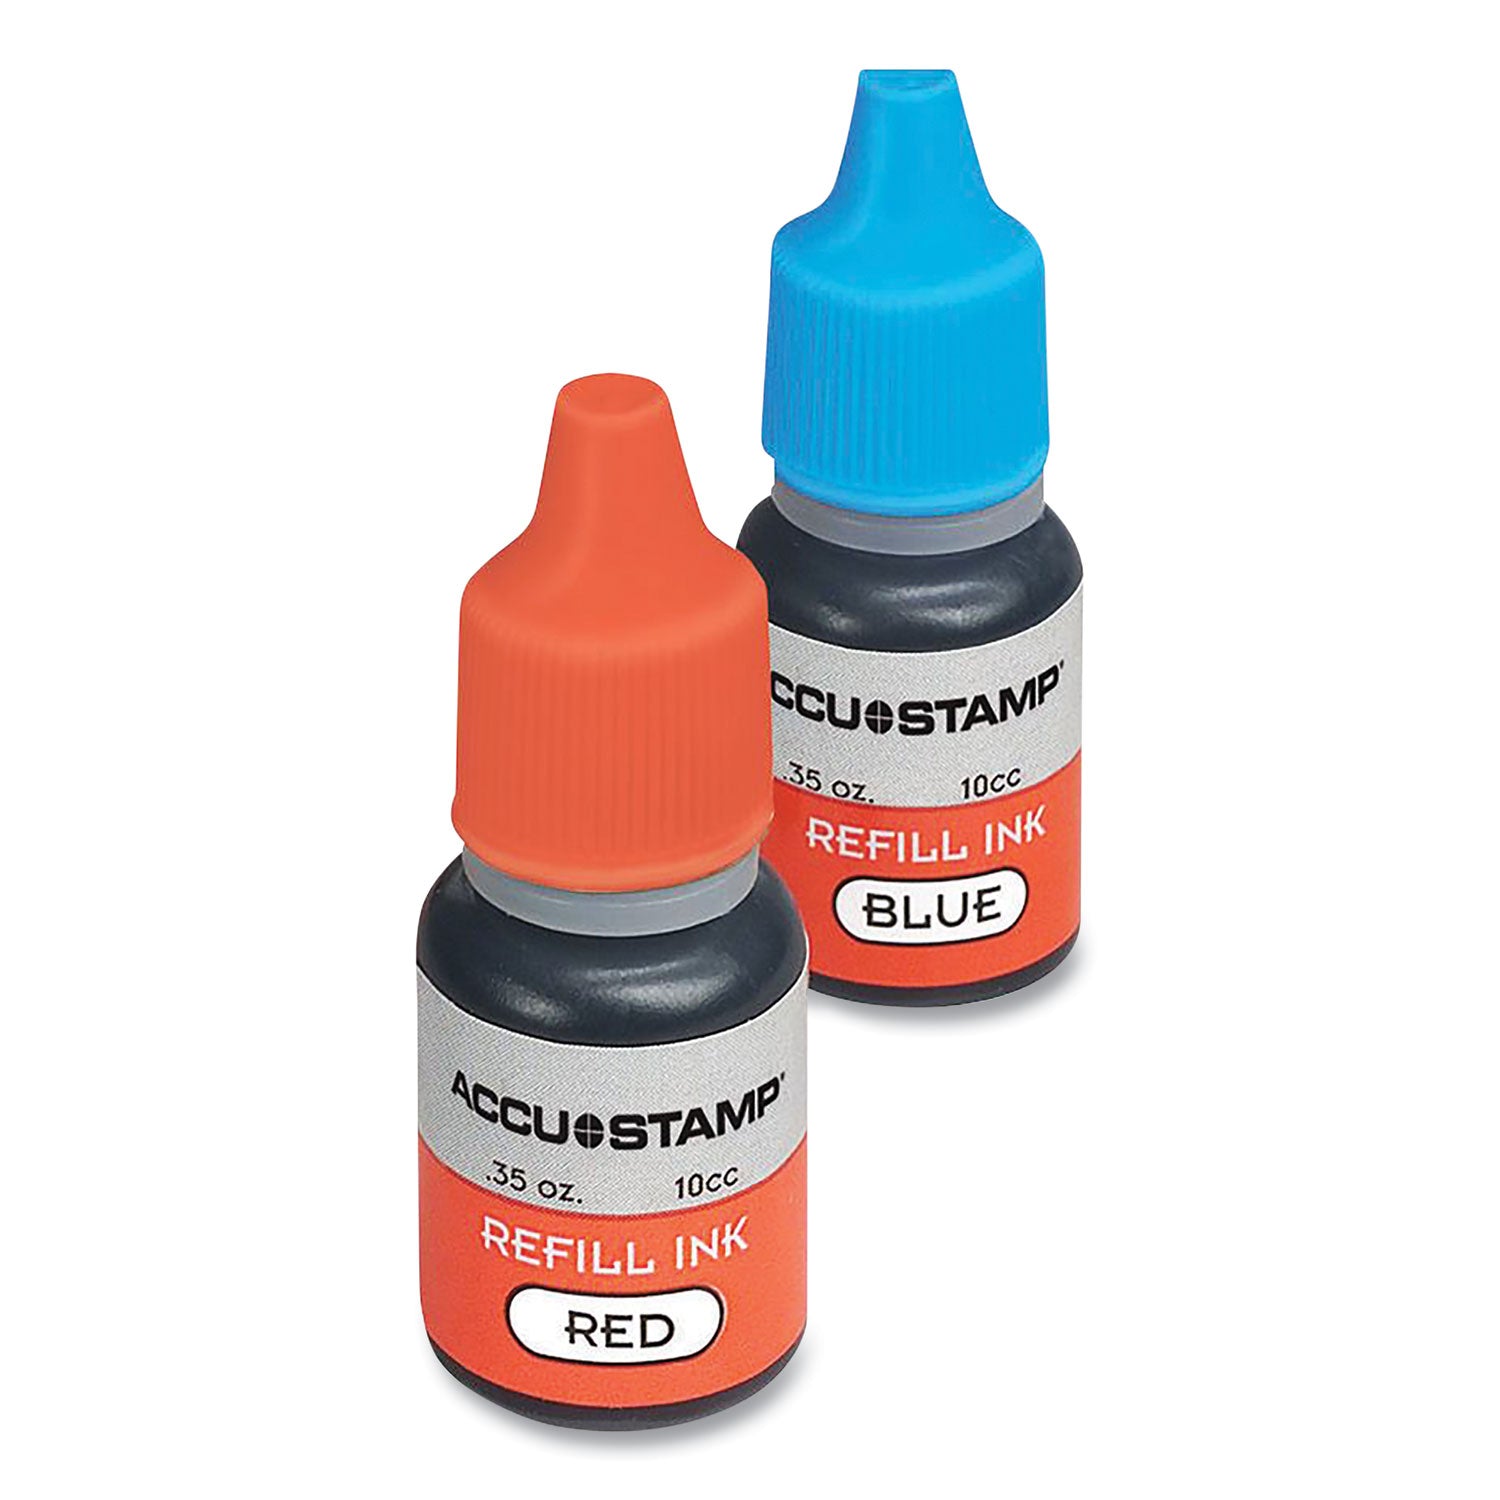 accu-stamp-refill-ink-035-oz-blue-red_cos032958 - 1